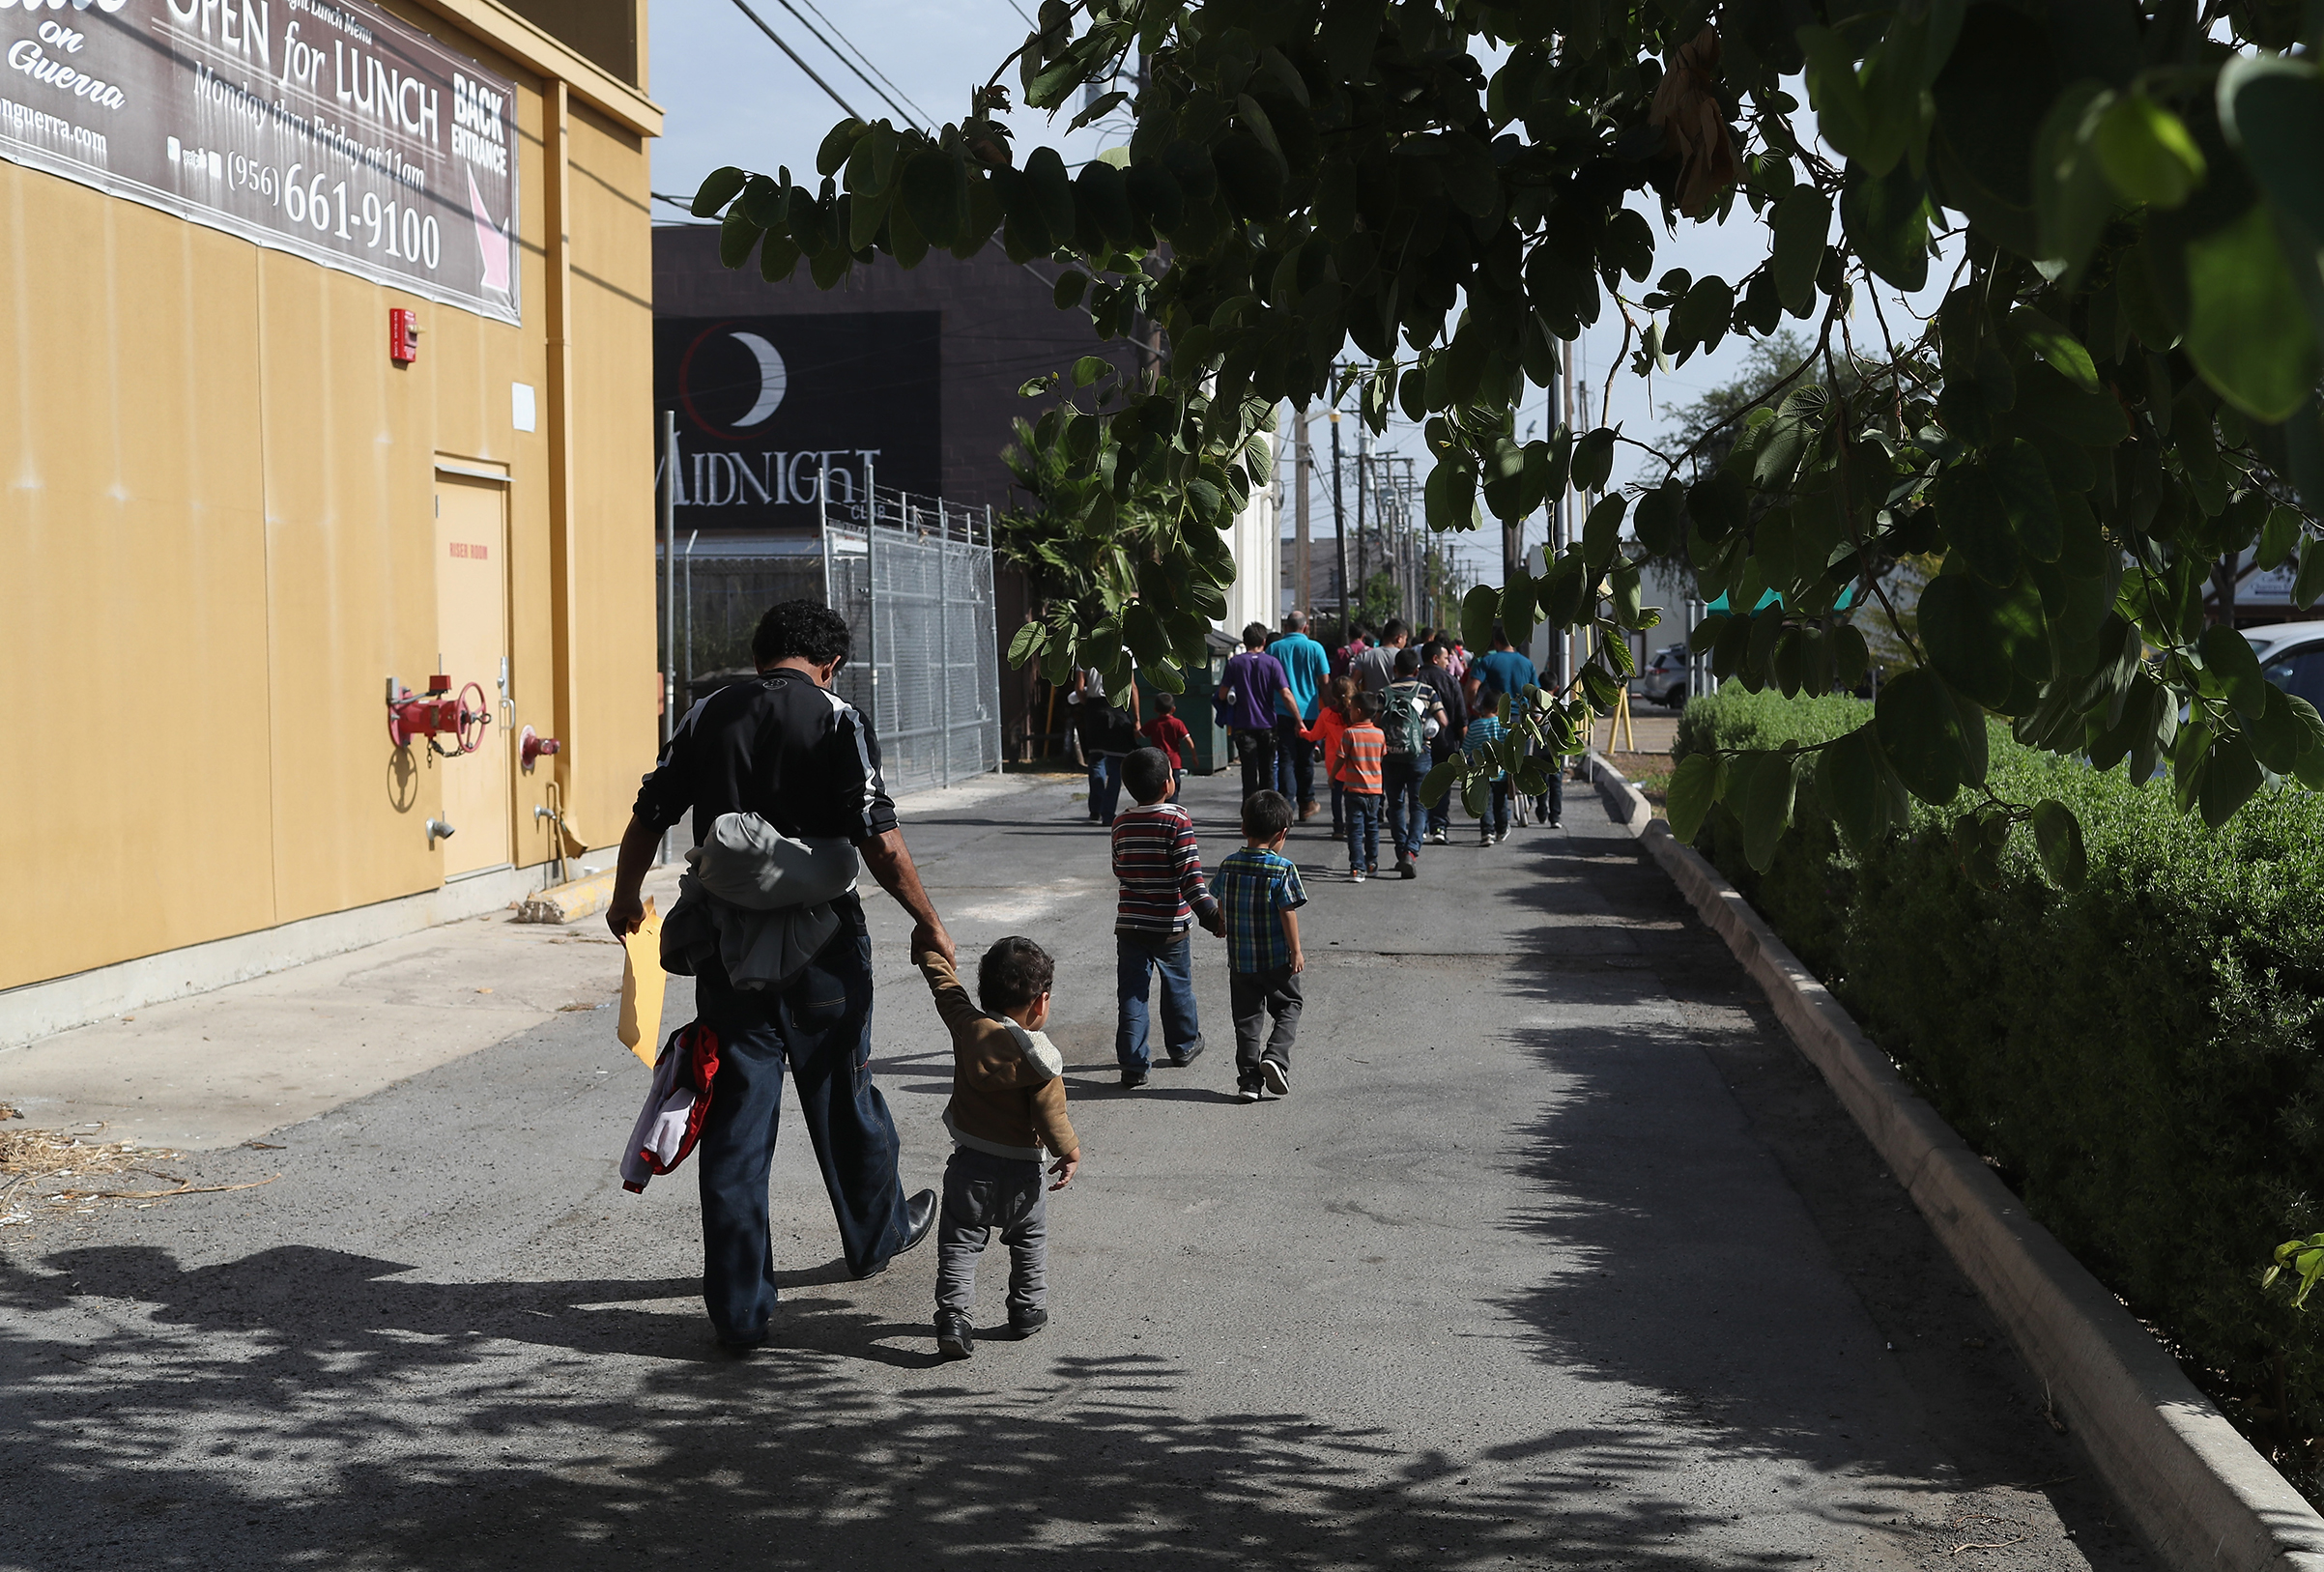 Central American immigrant families depart ICE custody, pending future immigration court hearings on June 11, 2018 in McAllen, Texas. Thousands of undocumented immigrants continue to cross into the U.S., despite the Trump administration's recent "zero tolerance" approach to immigration policy. (John Moore—Getty Images)